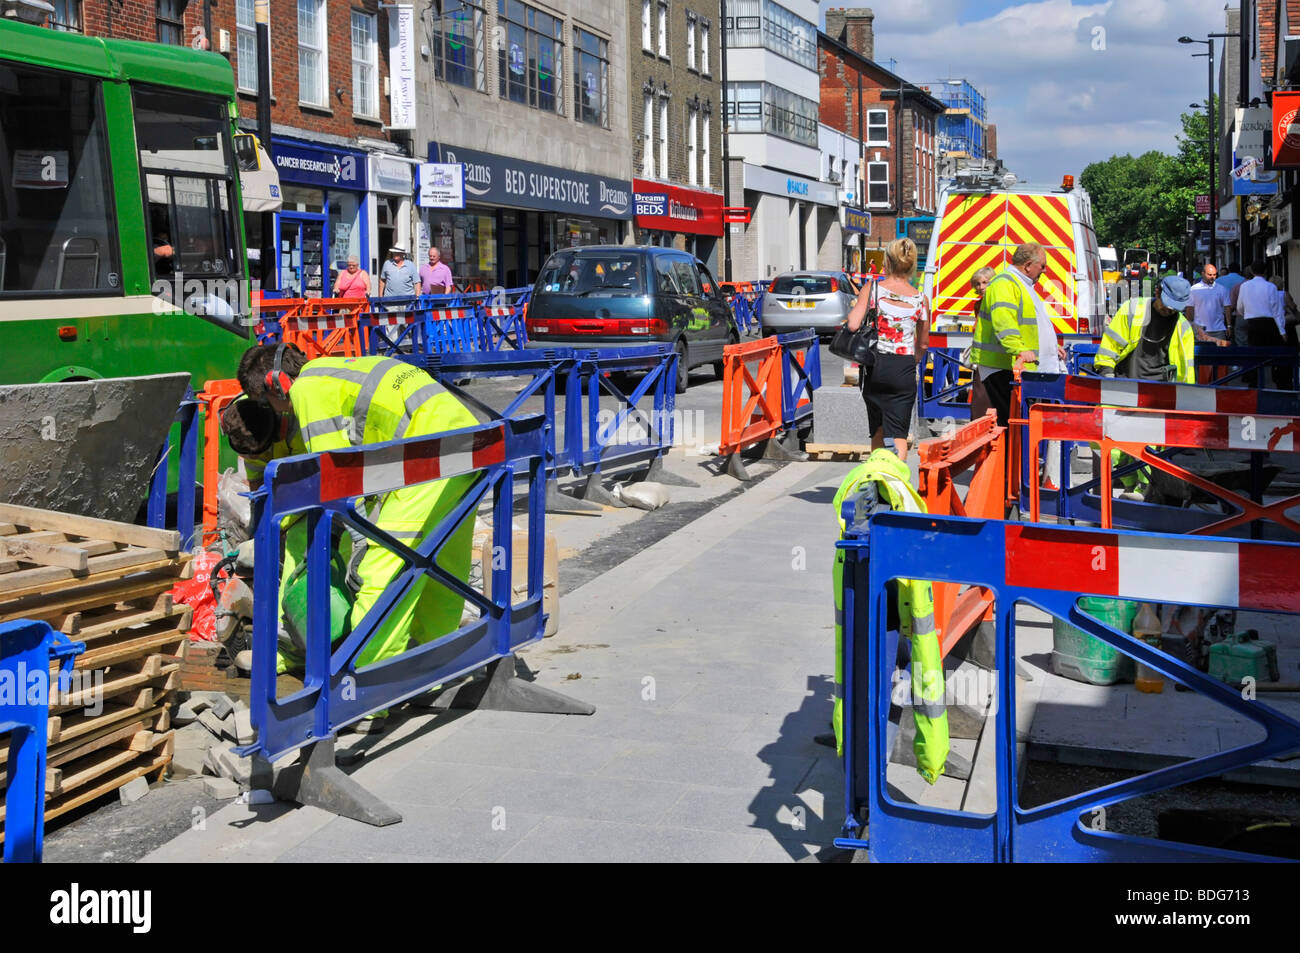 Brentwood shopping high street road works workmen in high visibility jackets upgrading road & pavement disrupting traffic & pedestrians Essex England Stock Photo